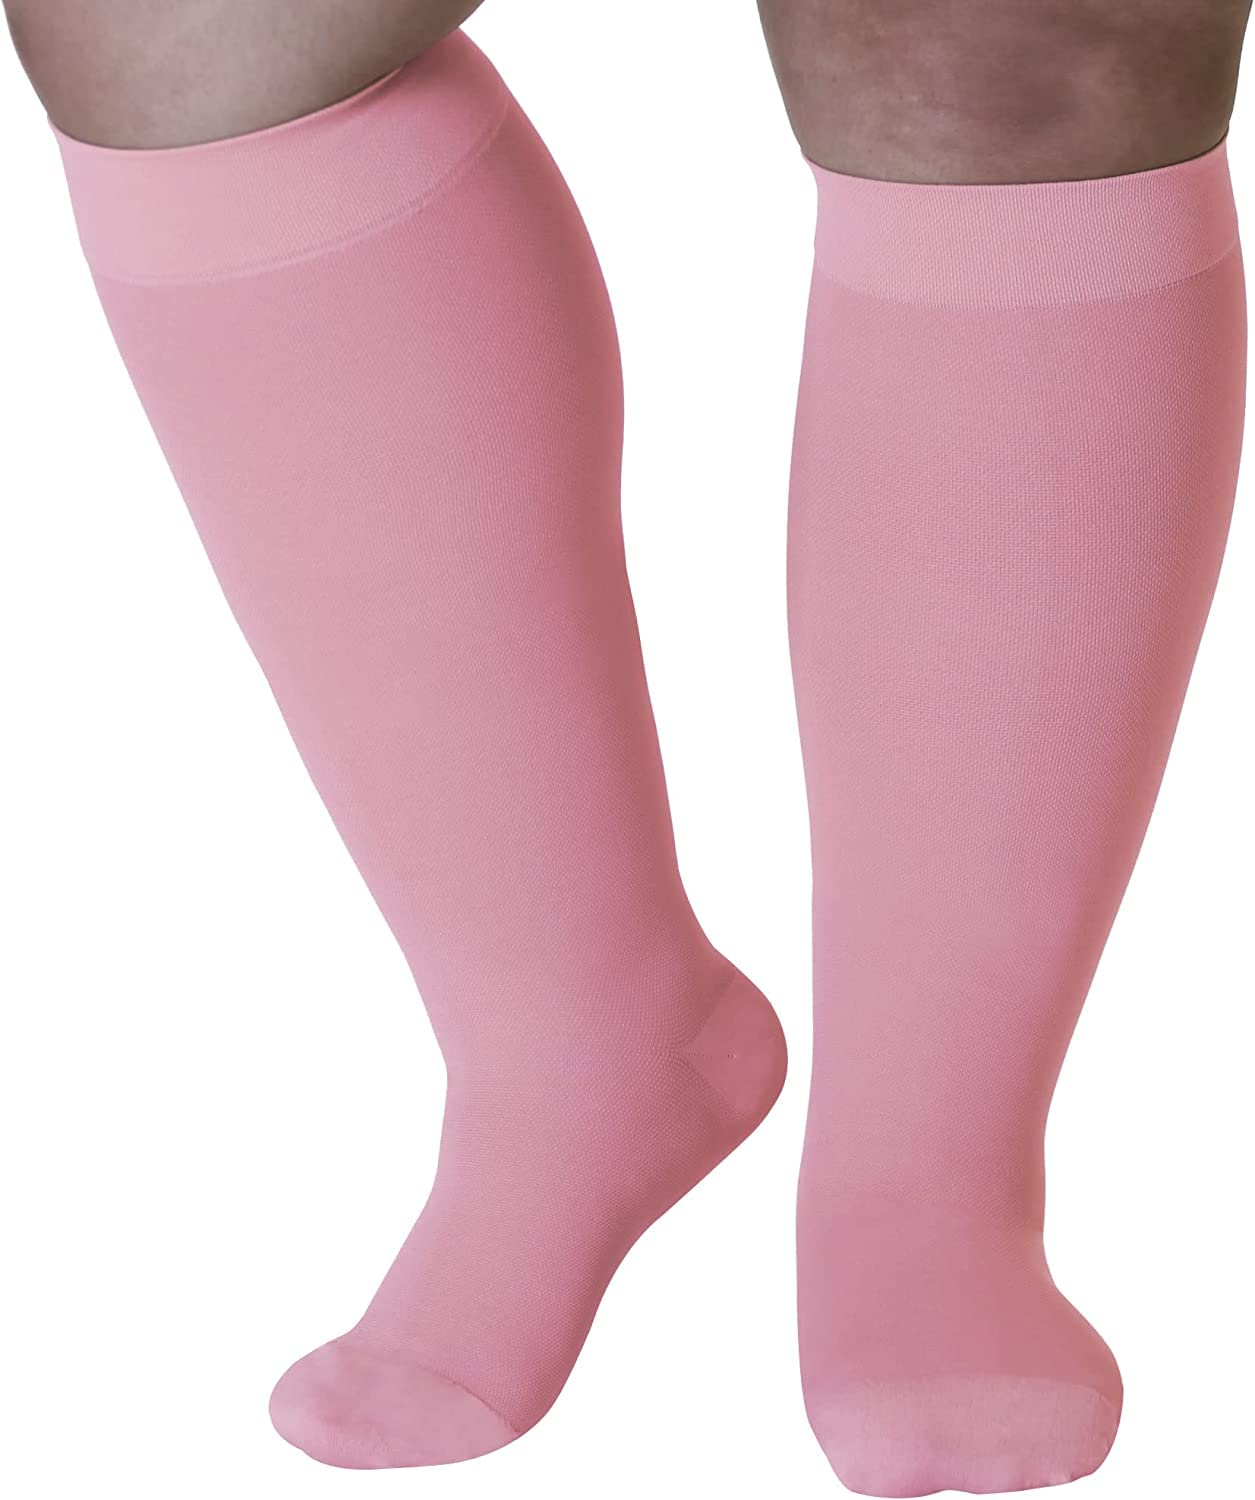 Mojo compression Socks Plus Size 20-30mmHg for Extra Wide Ankle calf Opaque Support - 7XL Pink closed Toe Stockings for Lymphede